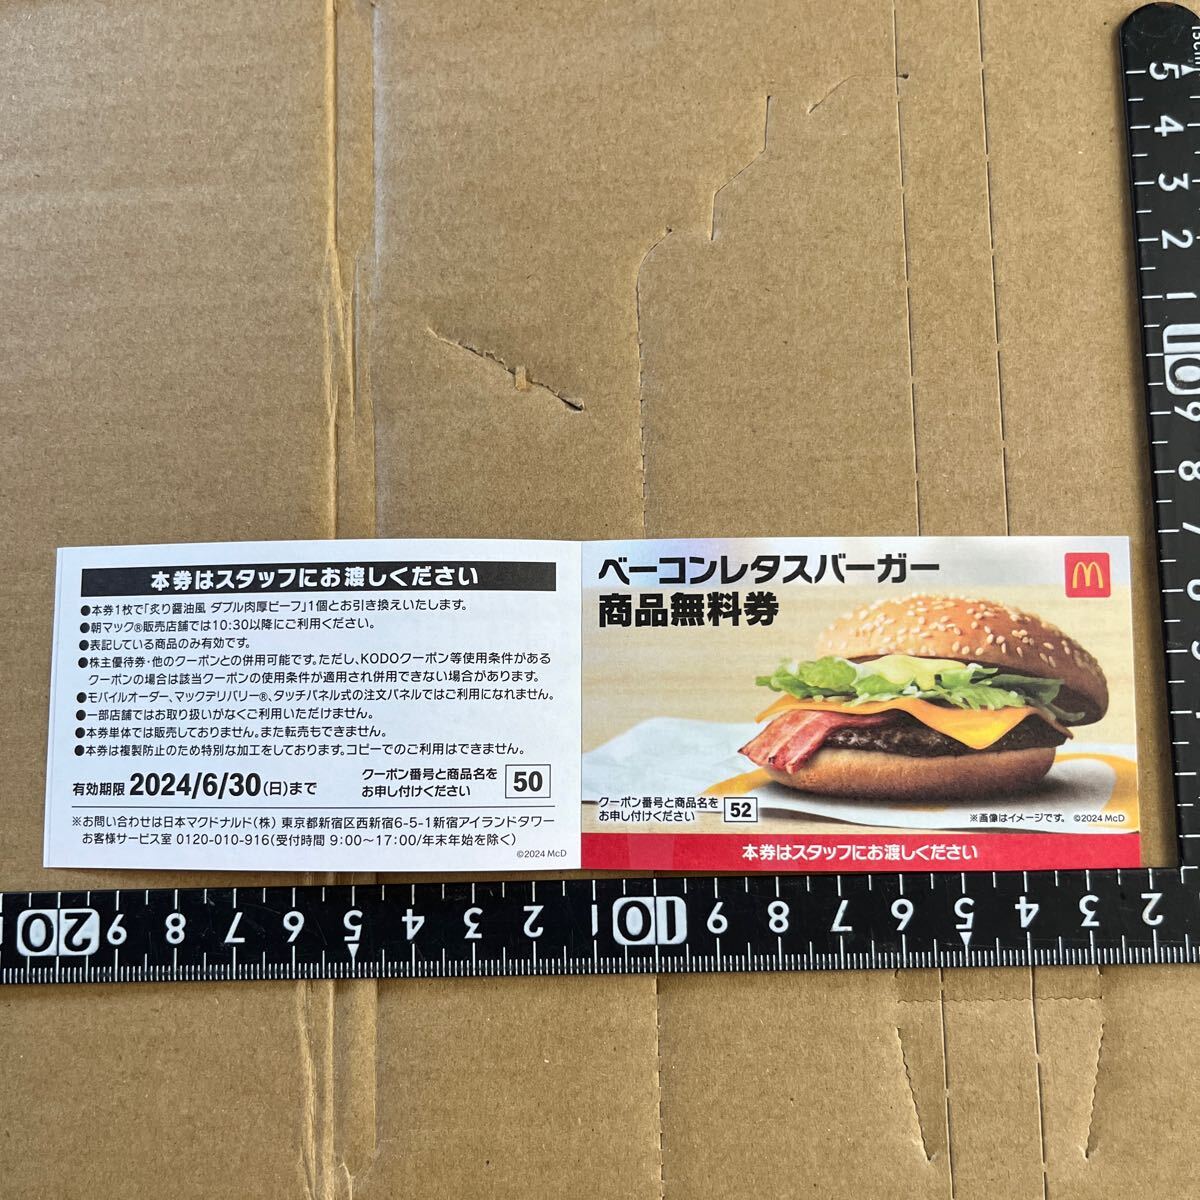  McDonald's lucky bag commodity free ticket shop front selling price 3,430 jpy corresponding 